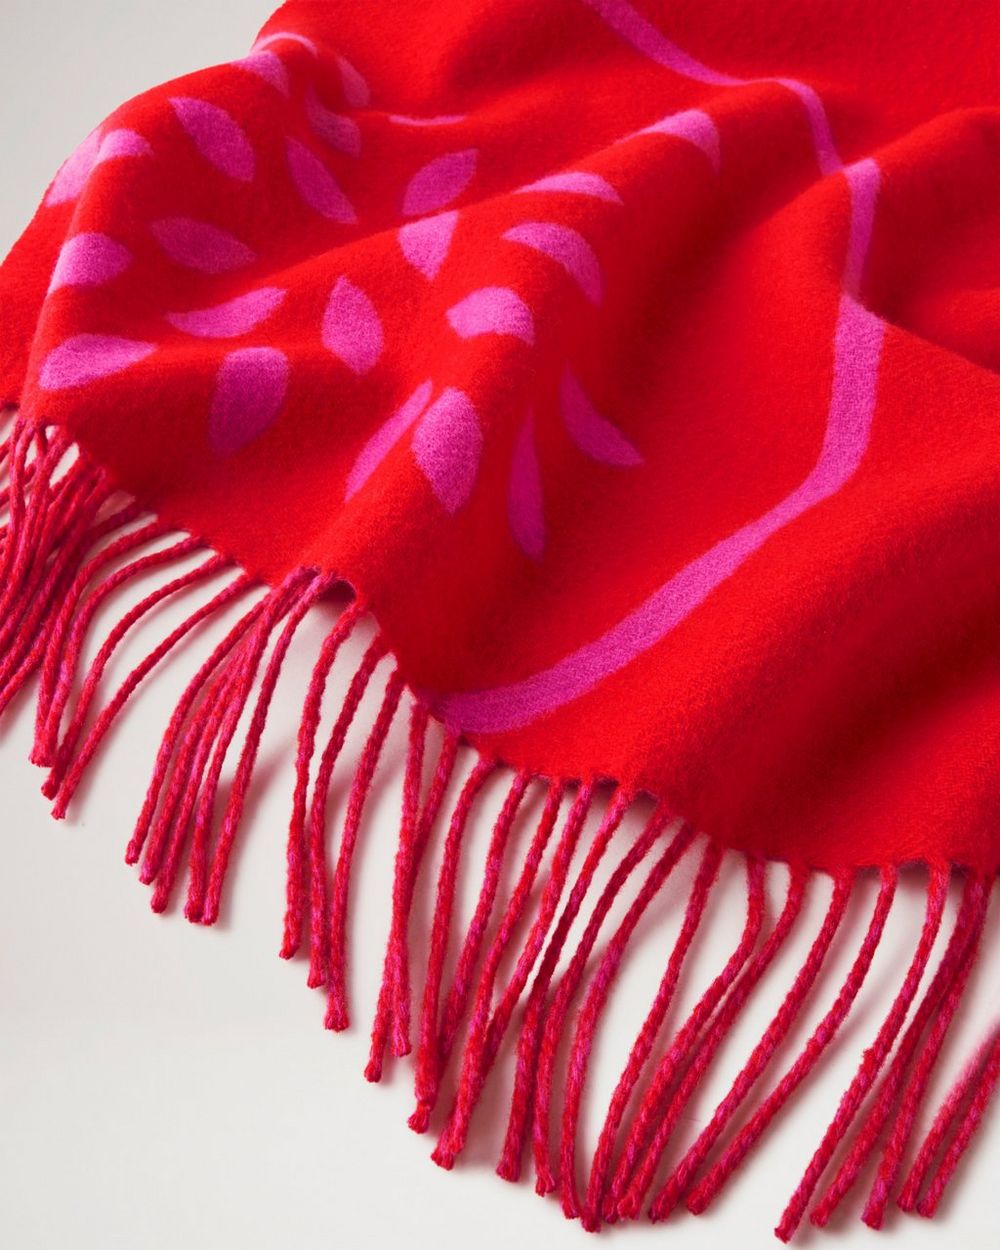 🧣 PRODUCT Review - Mulberry Red Scarf 🧣